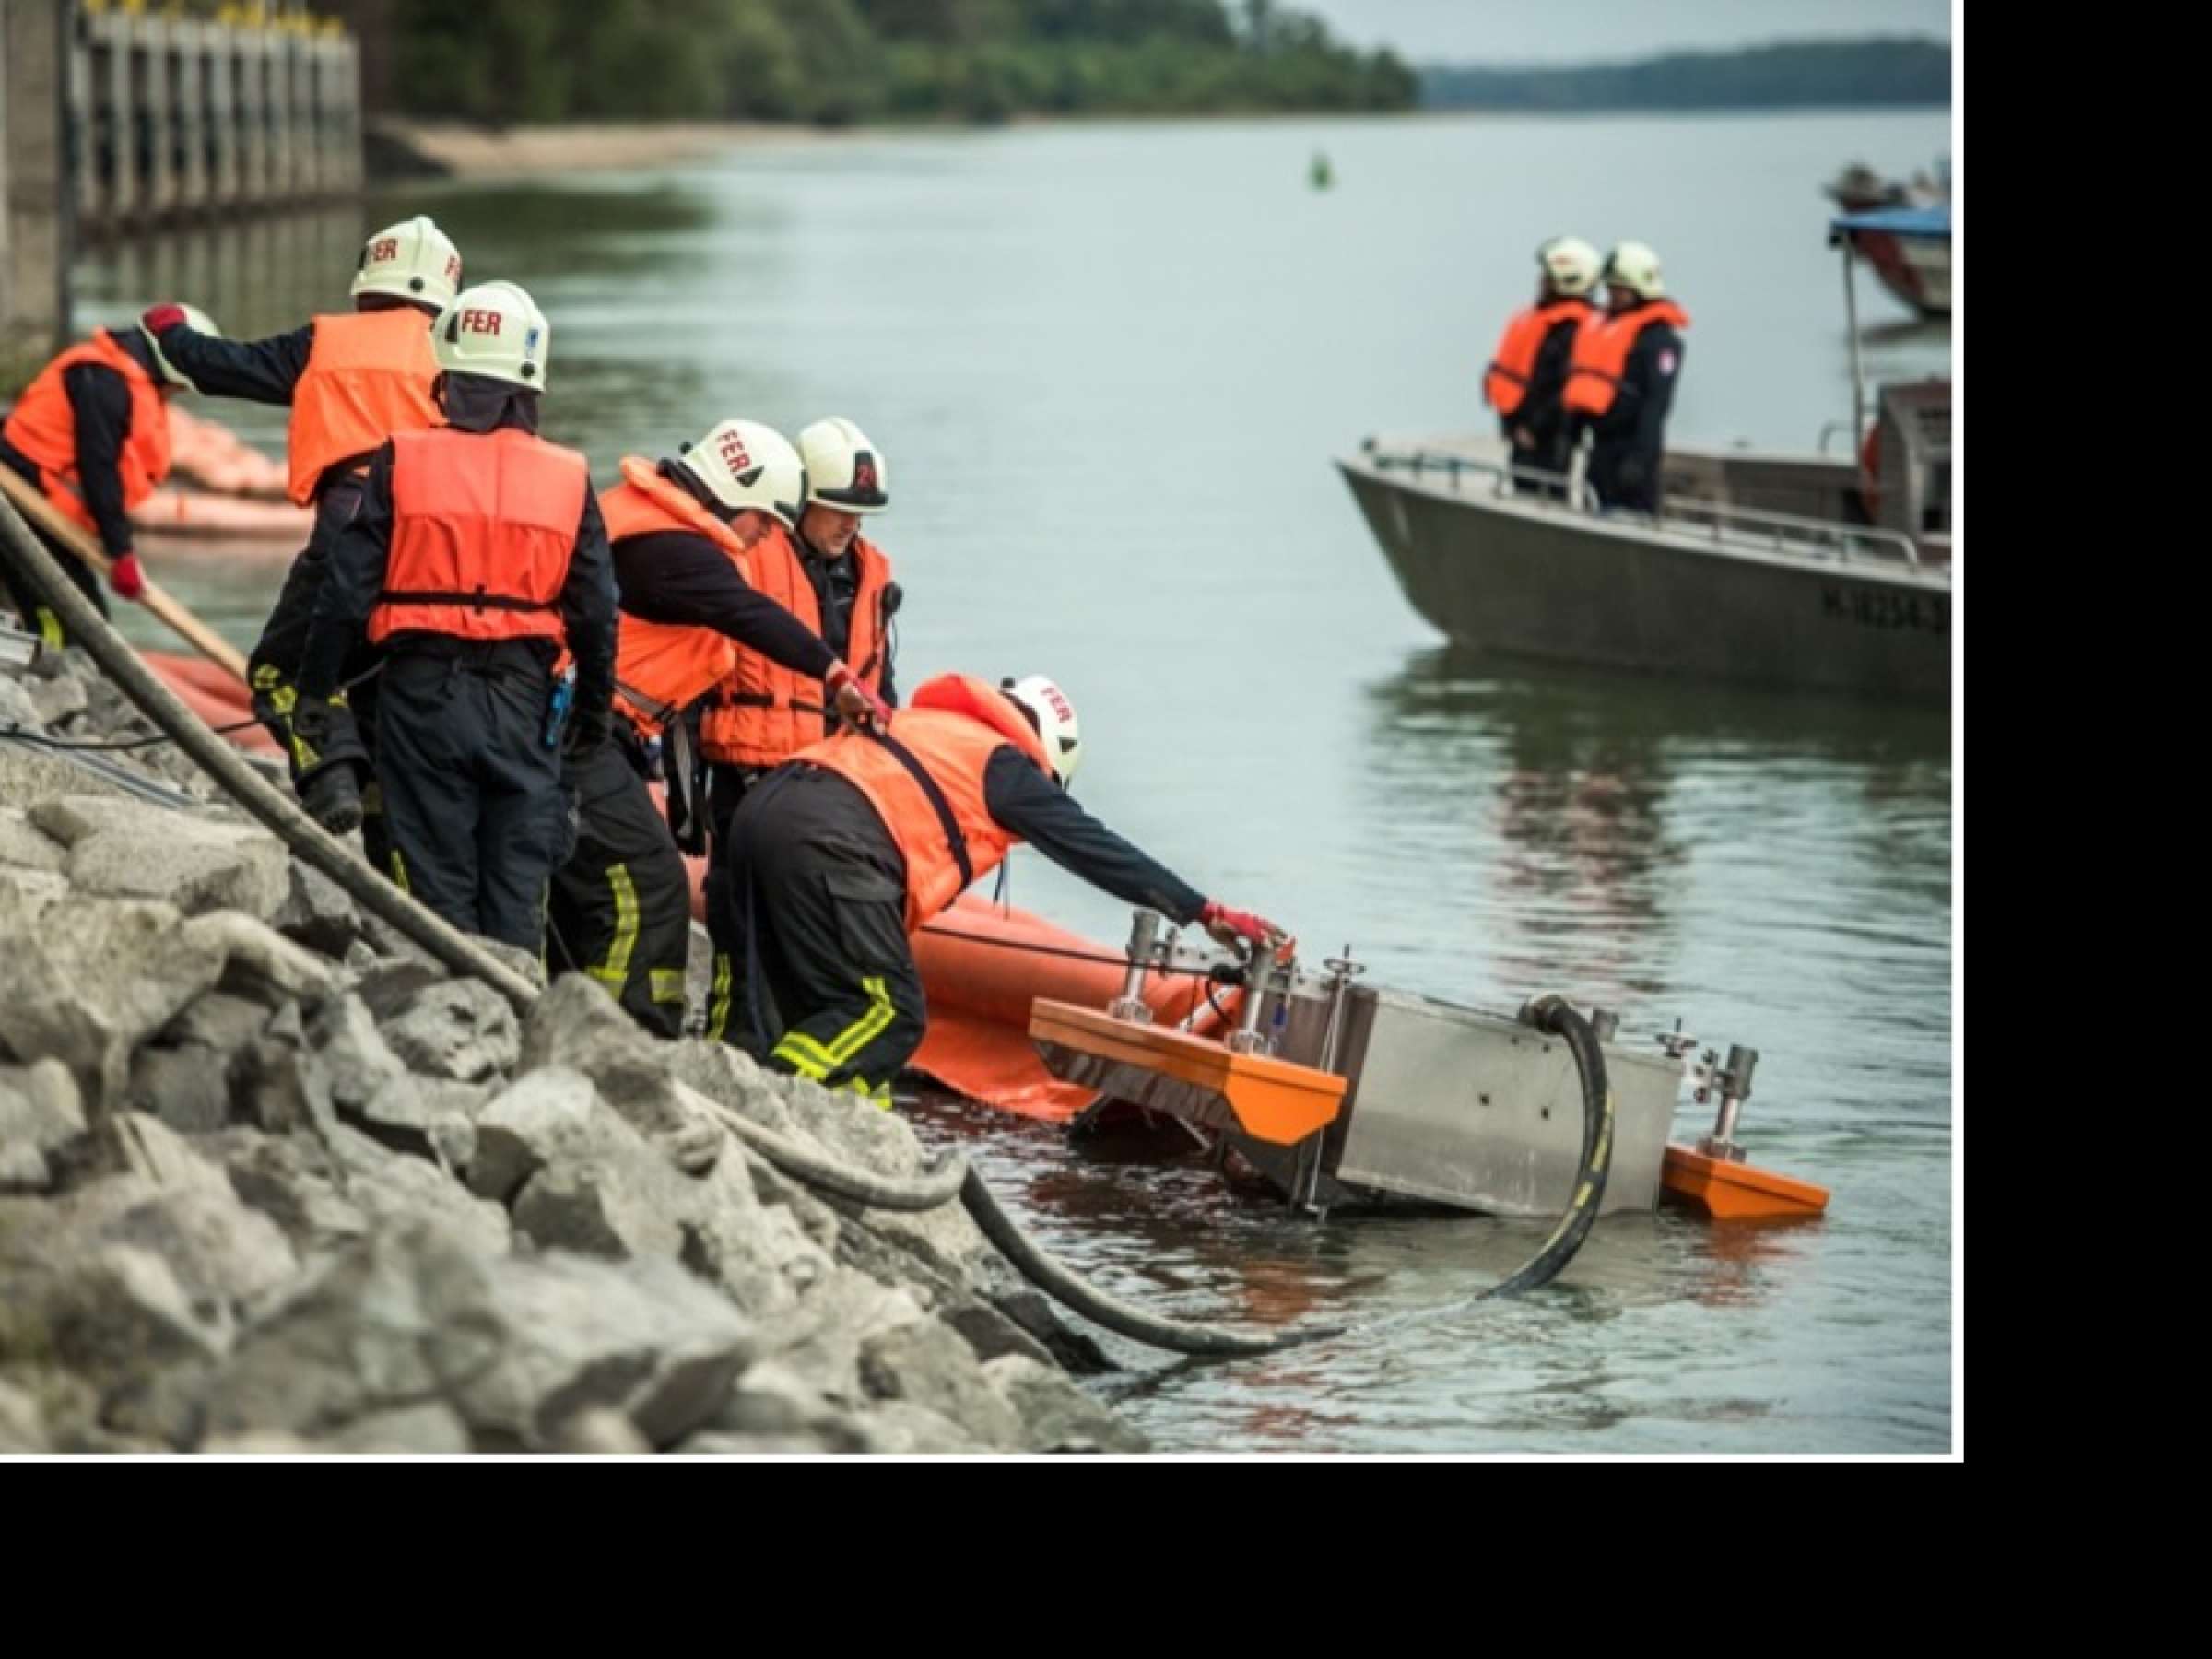 Joint expert group on water and industrial accidents